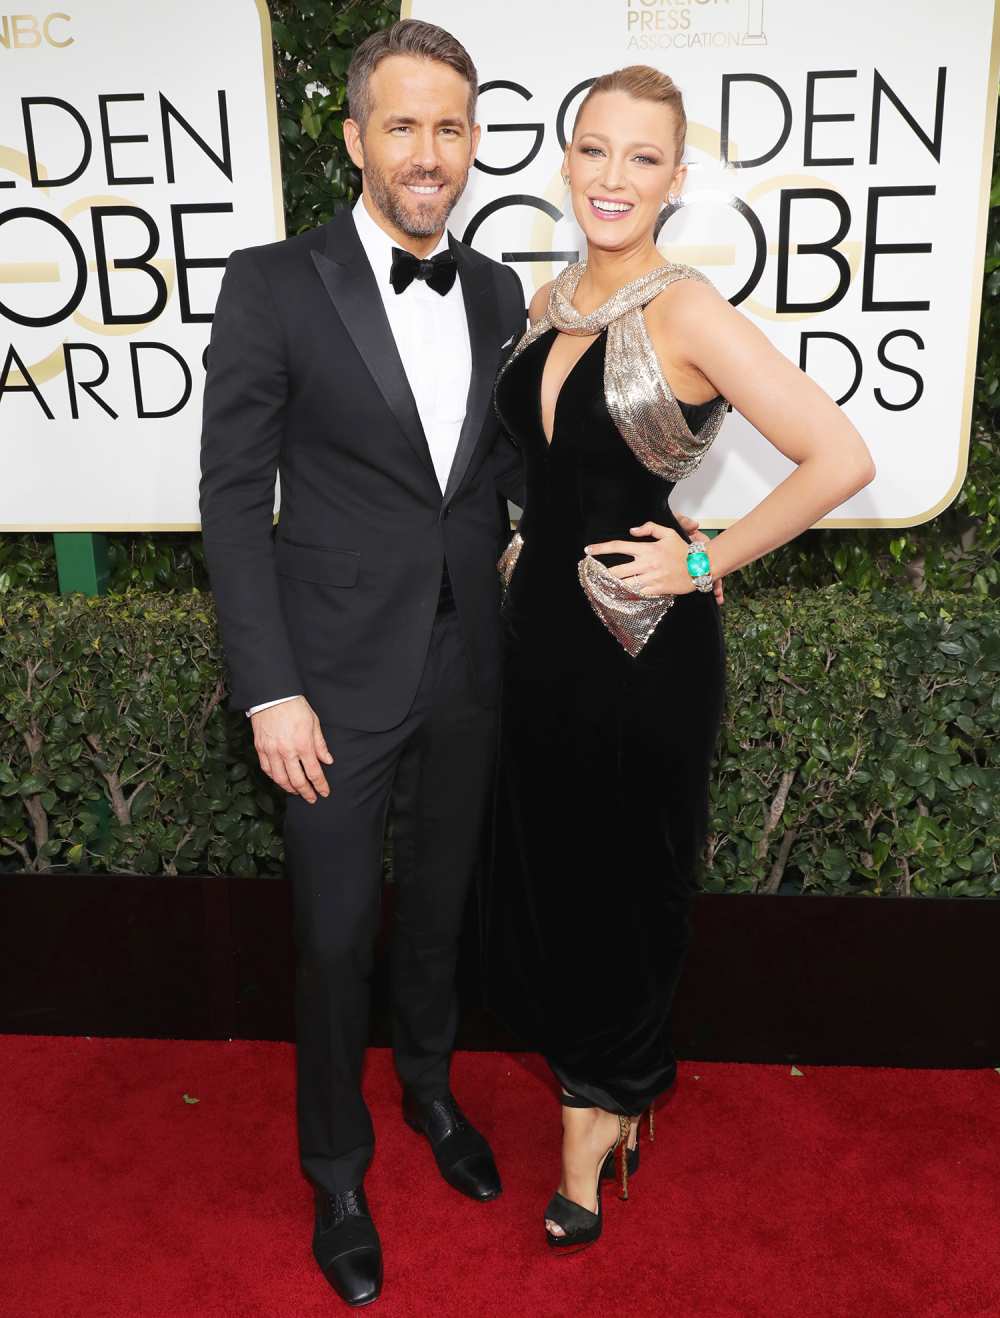 Ryan Reynolds and Blake Lively arrive at the 74th Annual Golden Globe Awards held at the Beverly Hilton Hotel on Jan. 8, 2017.